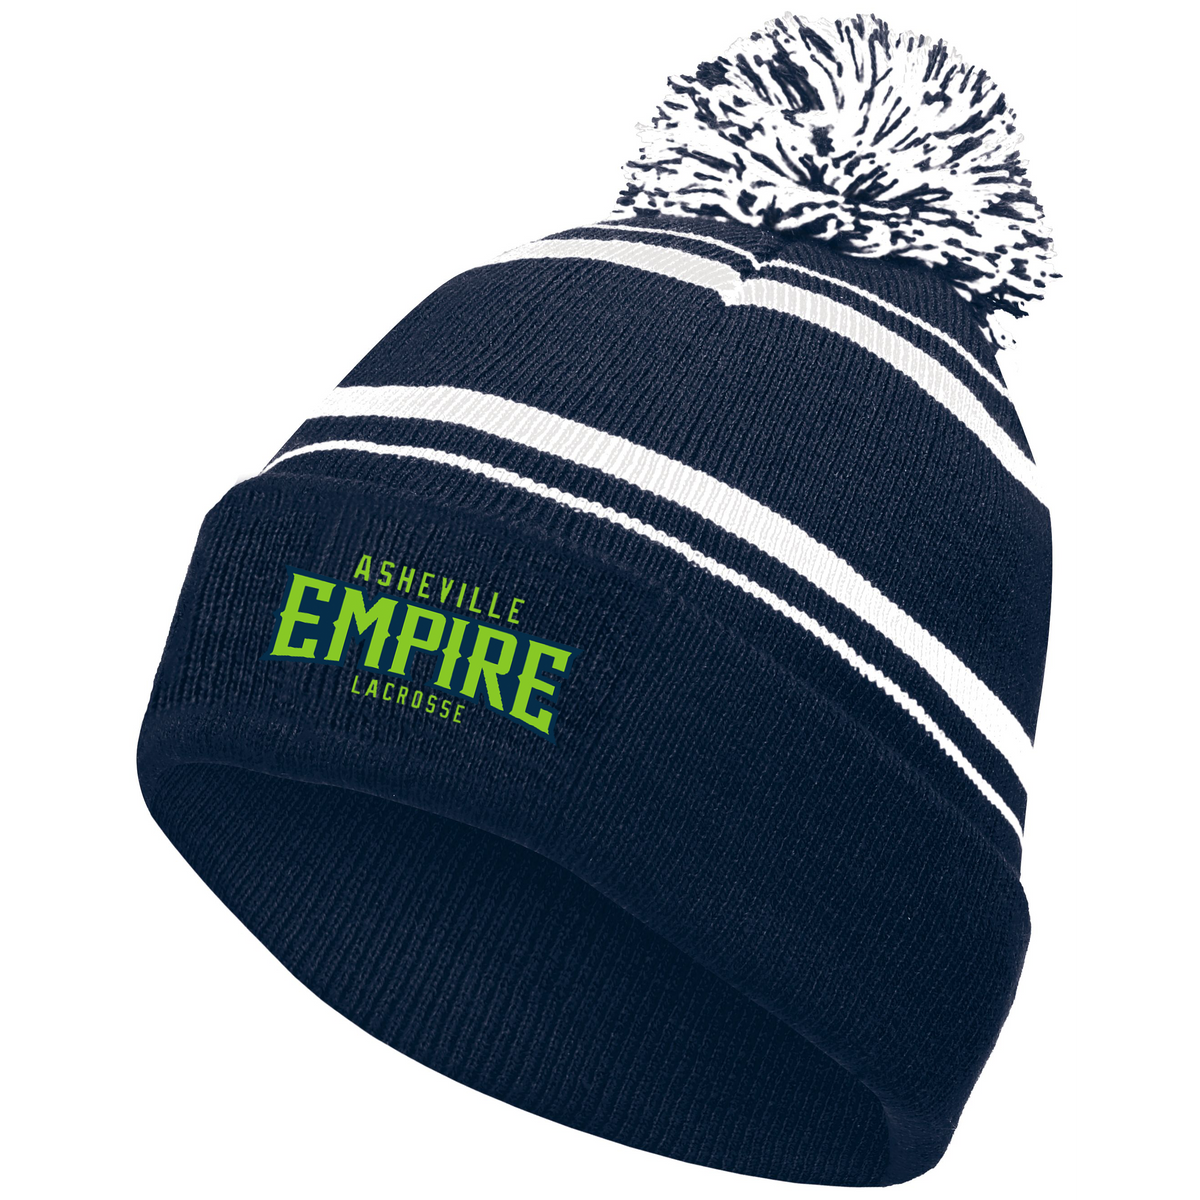 Asheville Empire Lacrosse Homecoming Beanie